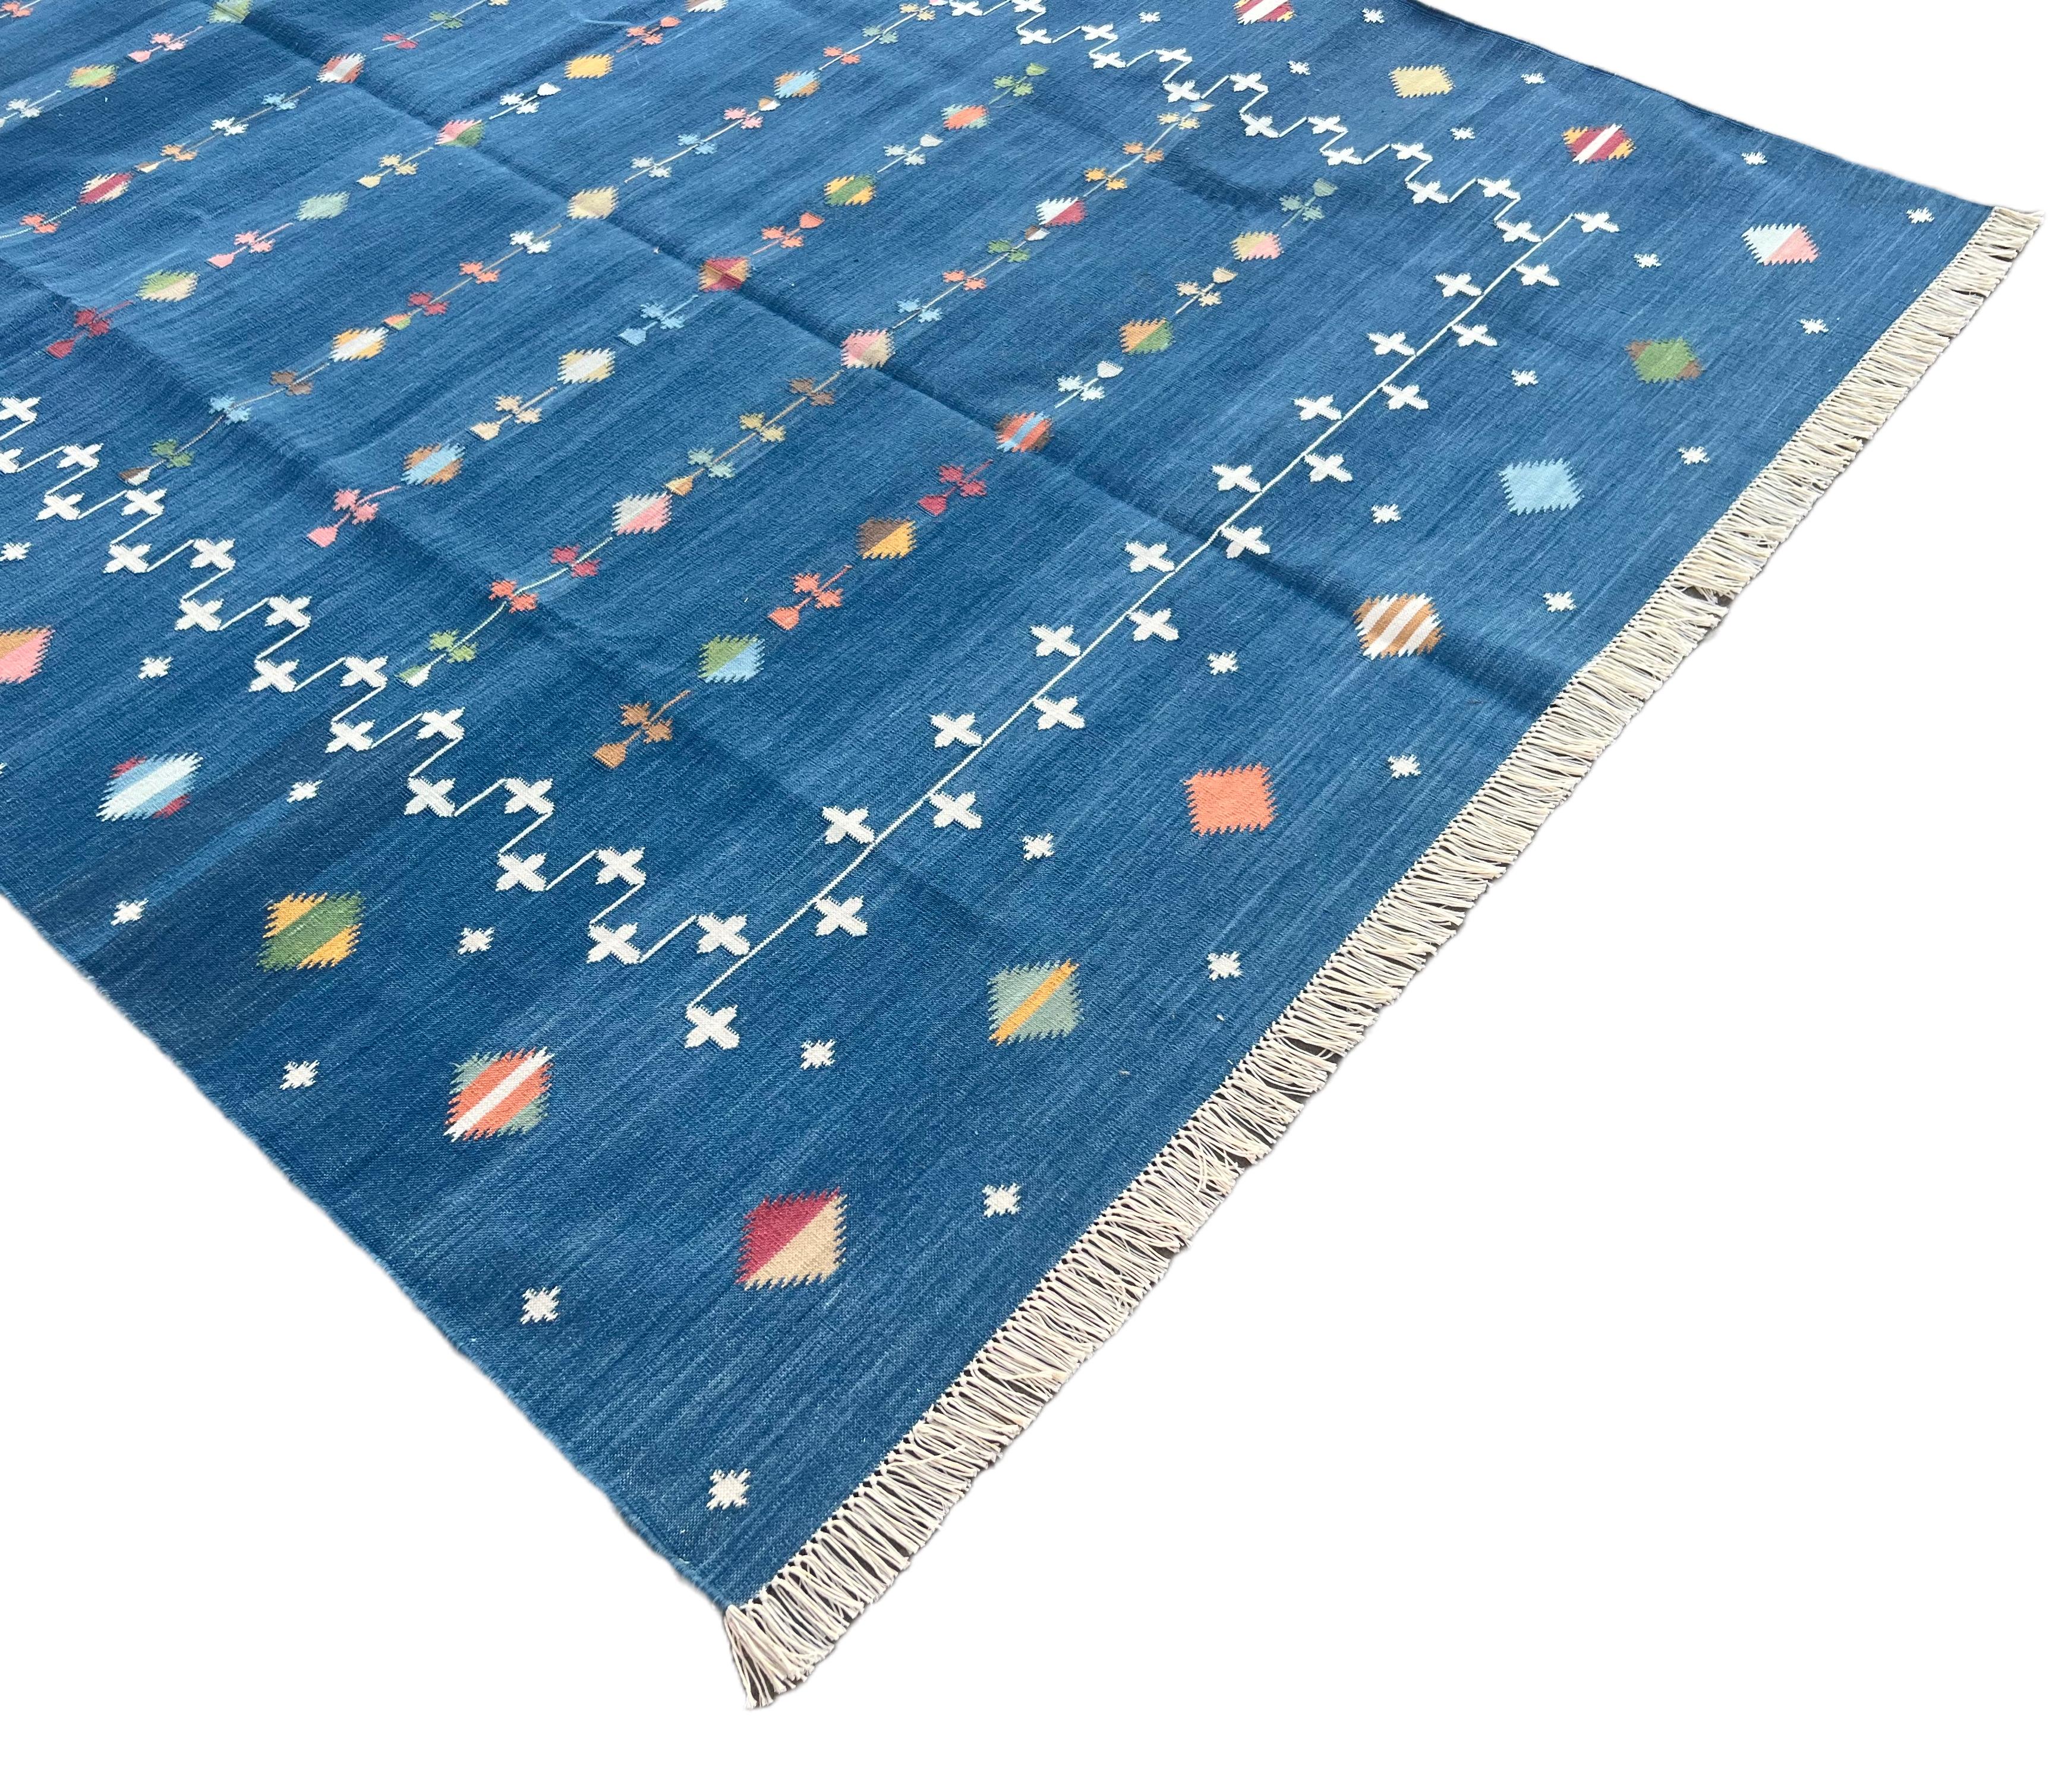 Kilim Handmade Cotton Area Flat Weave Rug, Blue And White Indian Shooting Star Dhurrie For Sale